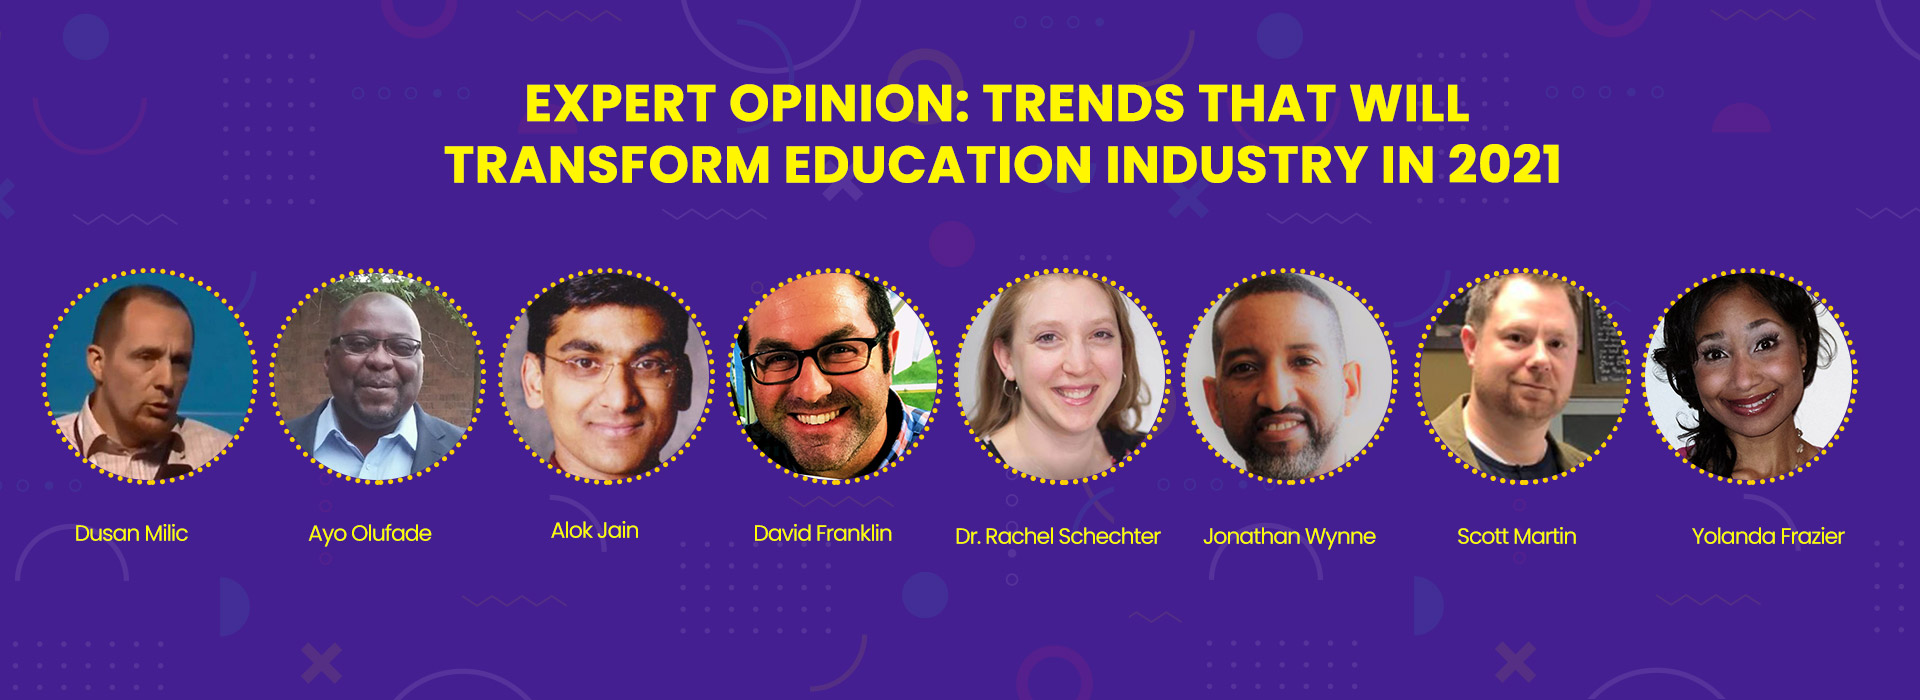 Expert Opinion on Education Industry Trends 2021